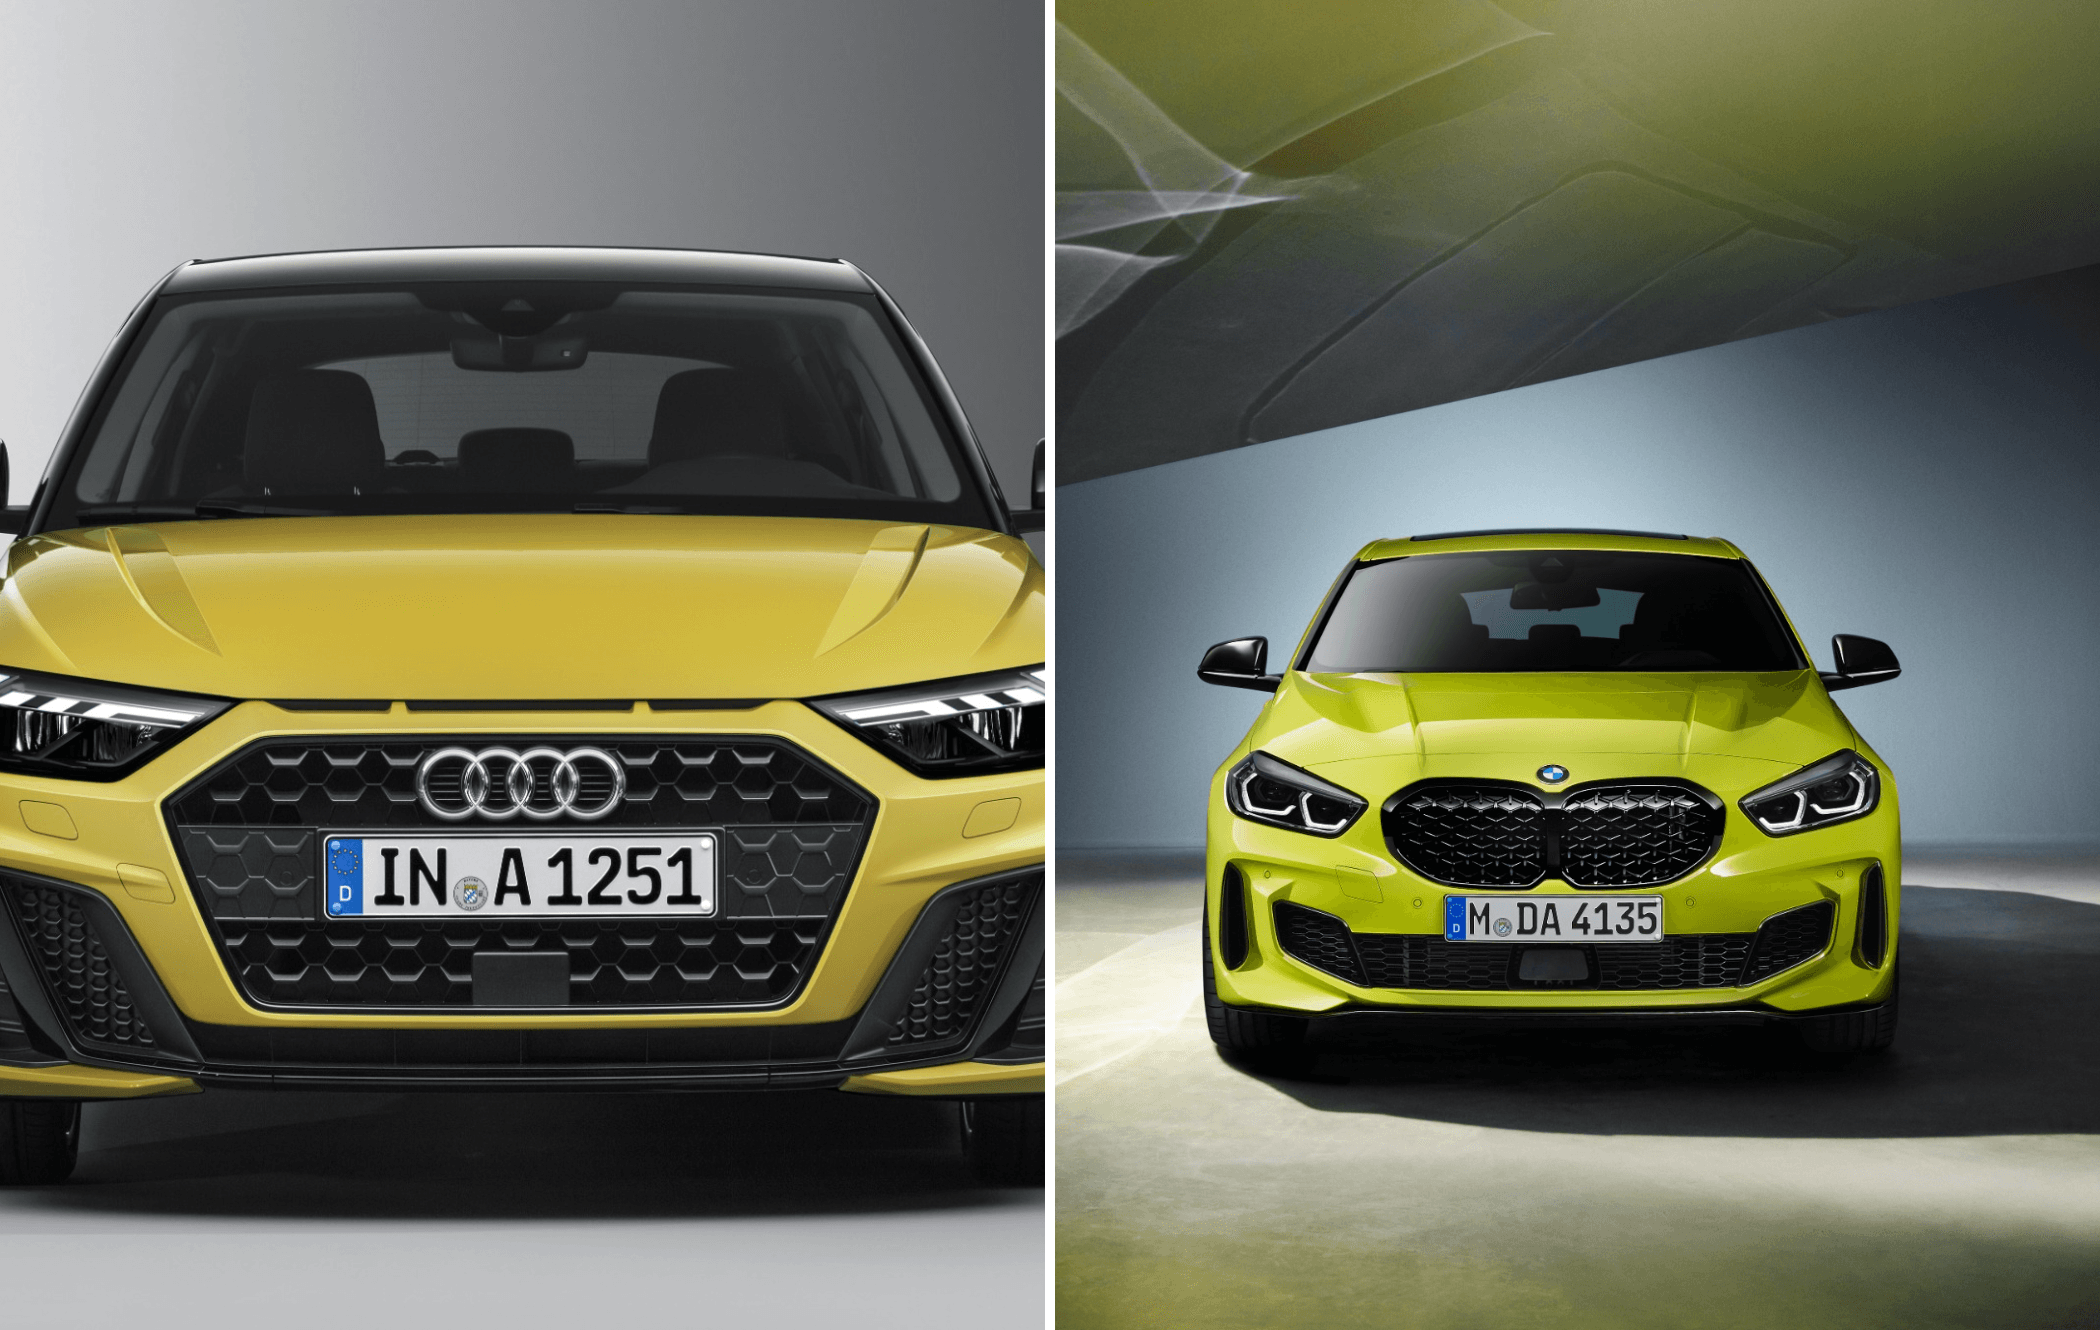 Frontal views of a yellow Audi A1 and a BMW 1 Series 